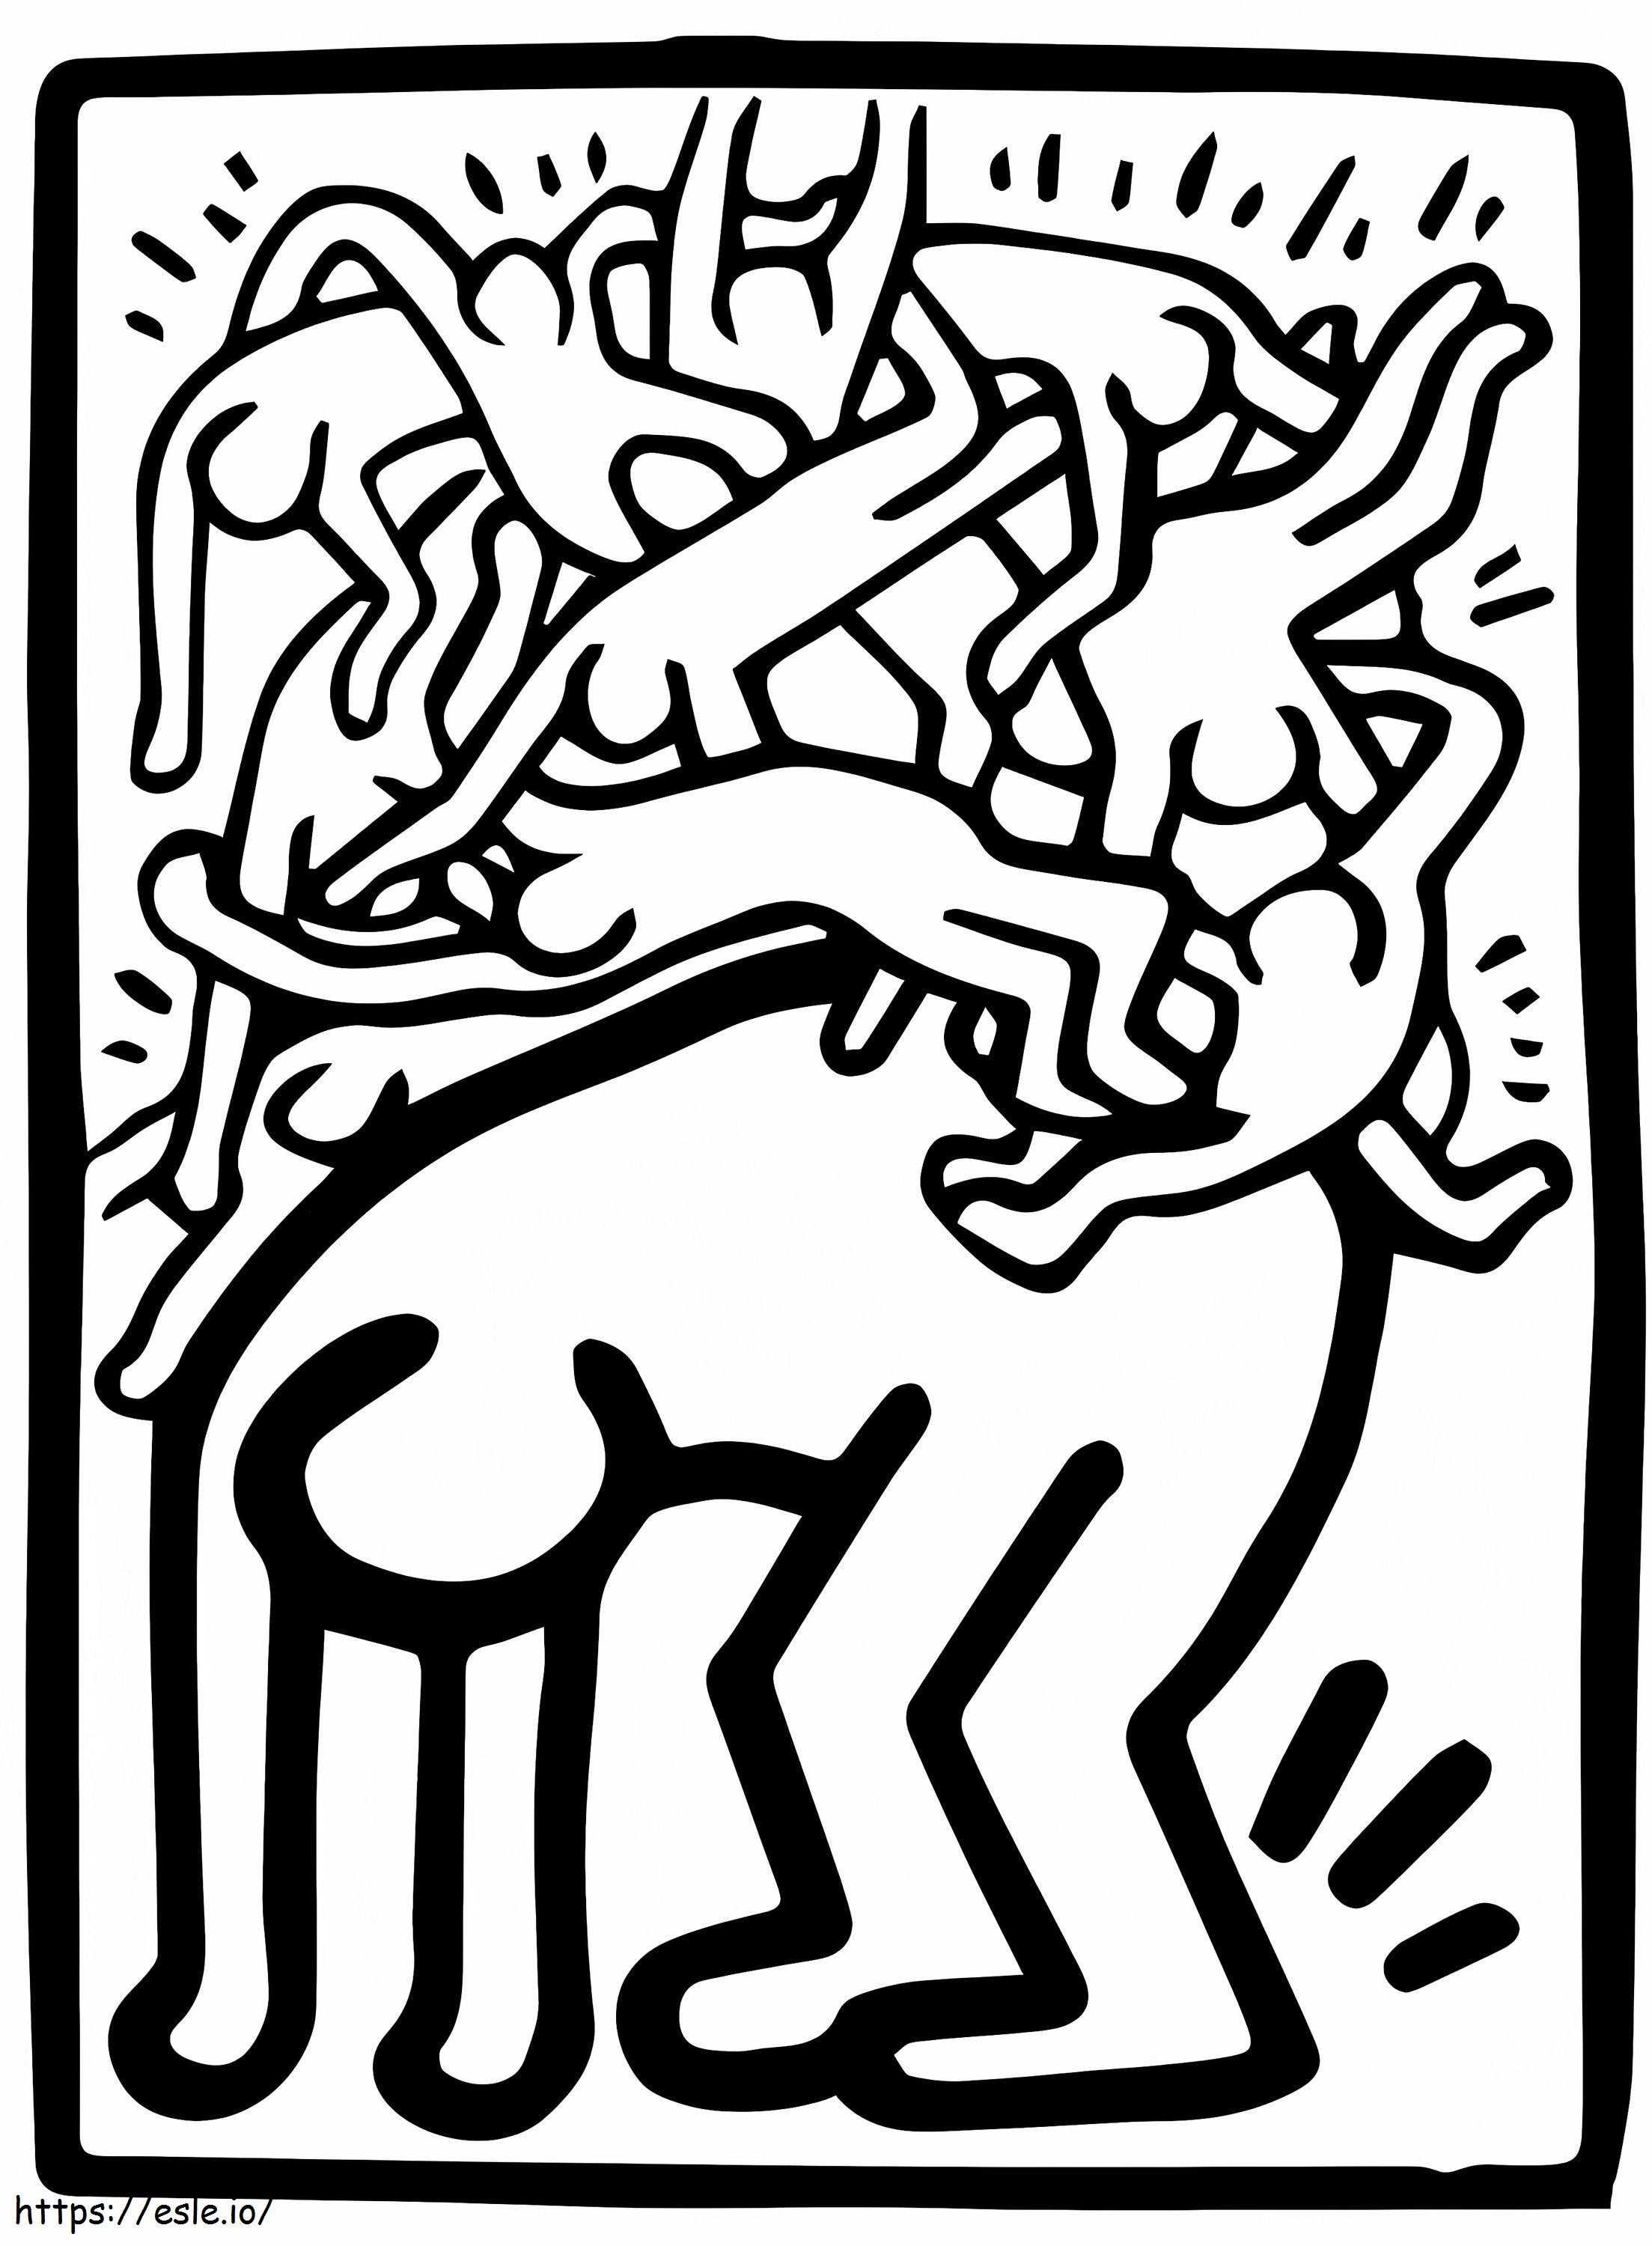 Fight Aids Worldwide By Keith Haring coloring page